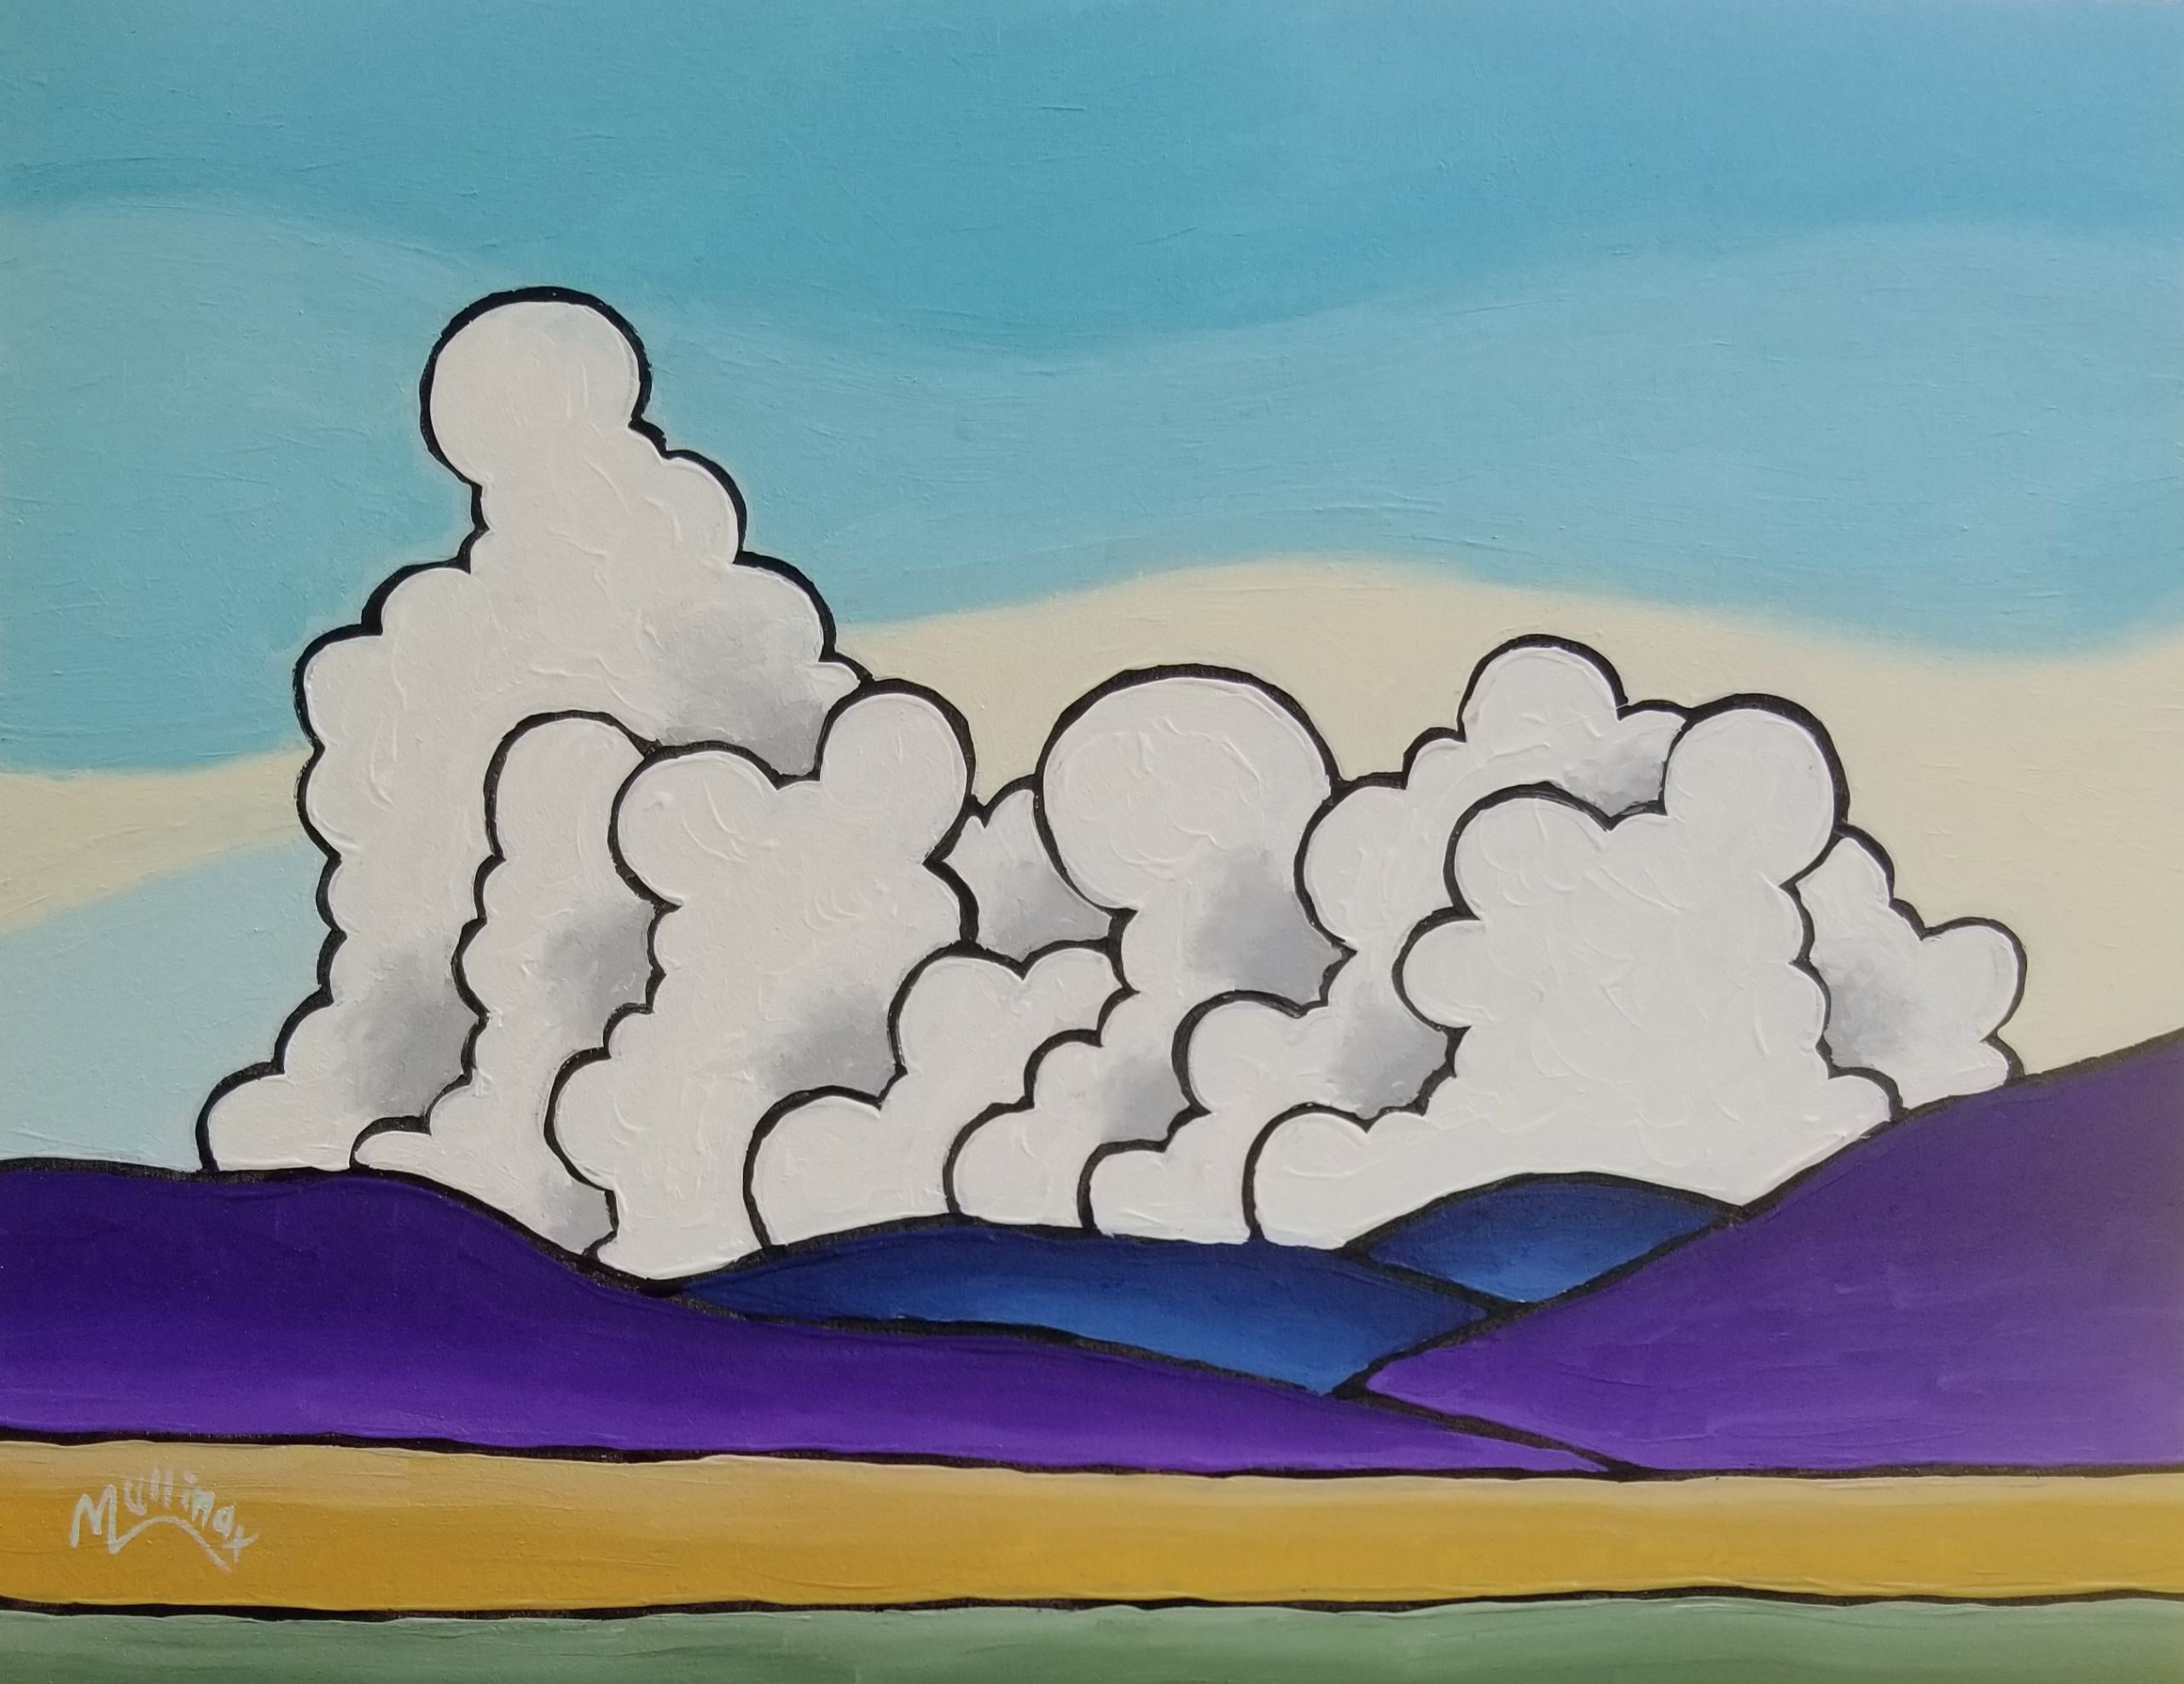 Marching Clouds | Painting by Kent Mullinax of Cartersville, Georgia | A painting with green and gold fields in the foreground, rolling purple and blue hills in the middle ground and seven fluffy clouds against a white and blue sky